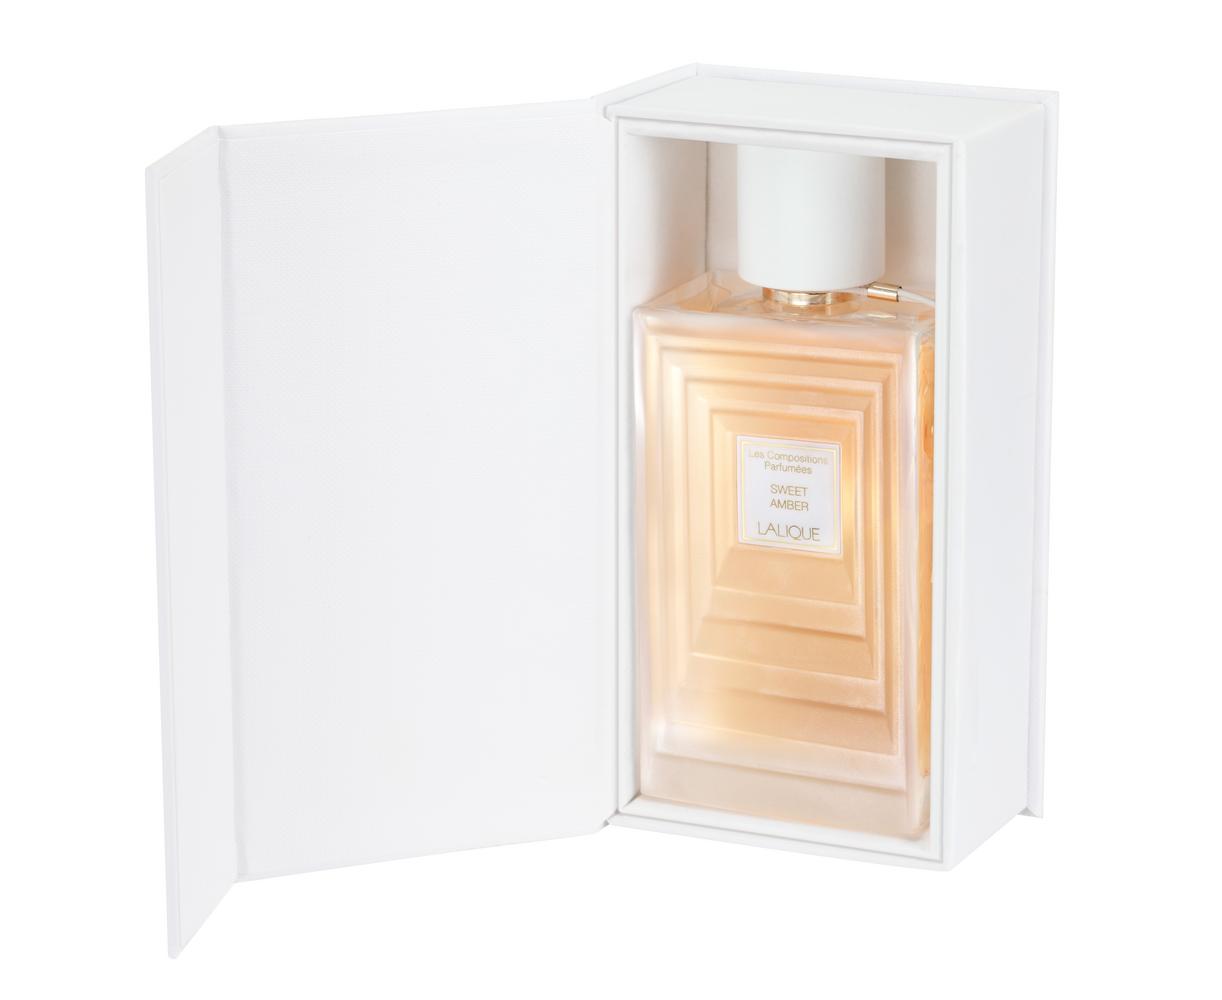 "SWEET AMBER" EDP 100ML LE COMPOSITIONS COLLECTION - EXCLUSIVE - EASTERN SCENT